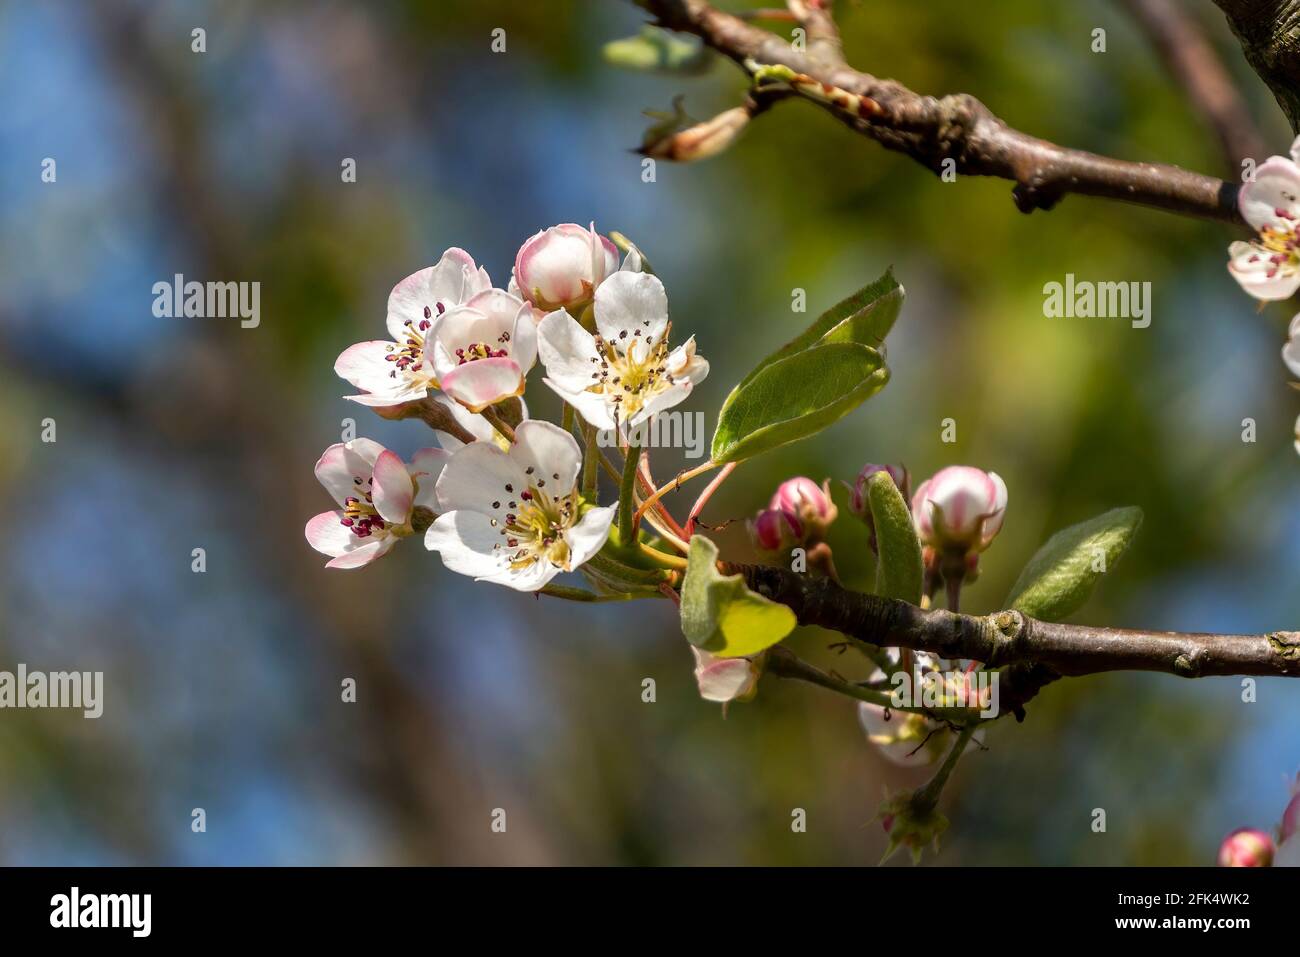 Apricot Goldrich (Prunus armeniaca) a springtime flowering tree plant with pink white flower blossom in the spring season, stock photo image Stock Photo